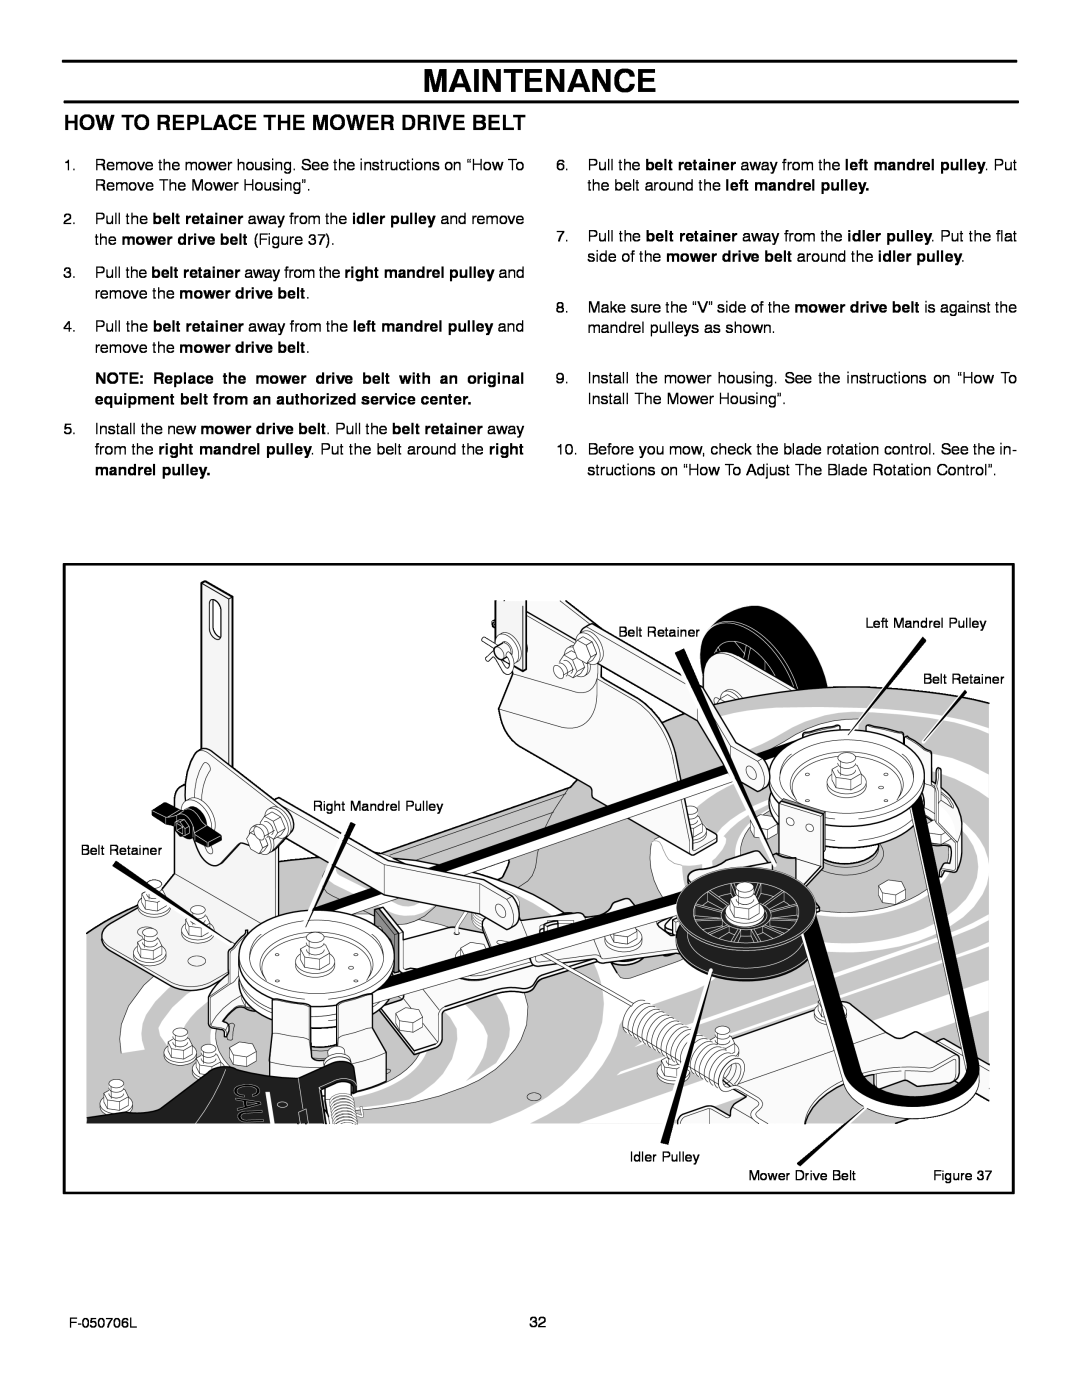 Murray 425014x92B manual Maintenance, How To Replace The Mower Drive Belt 